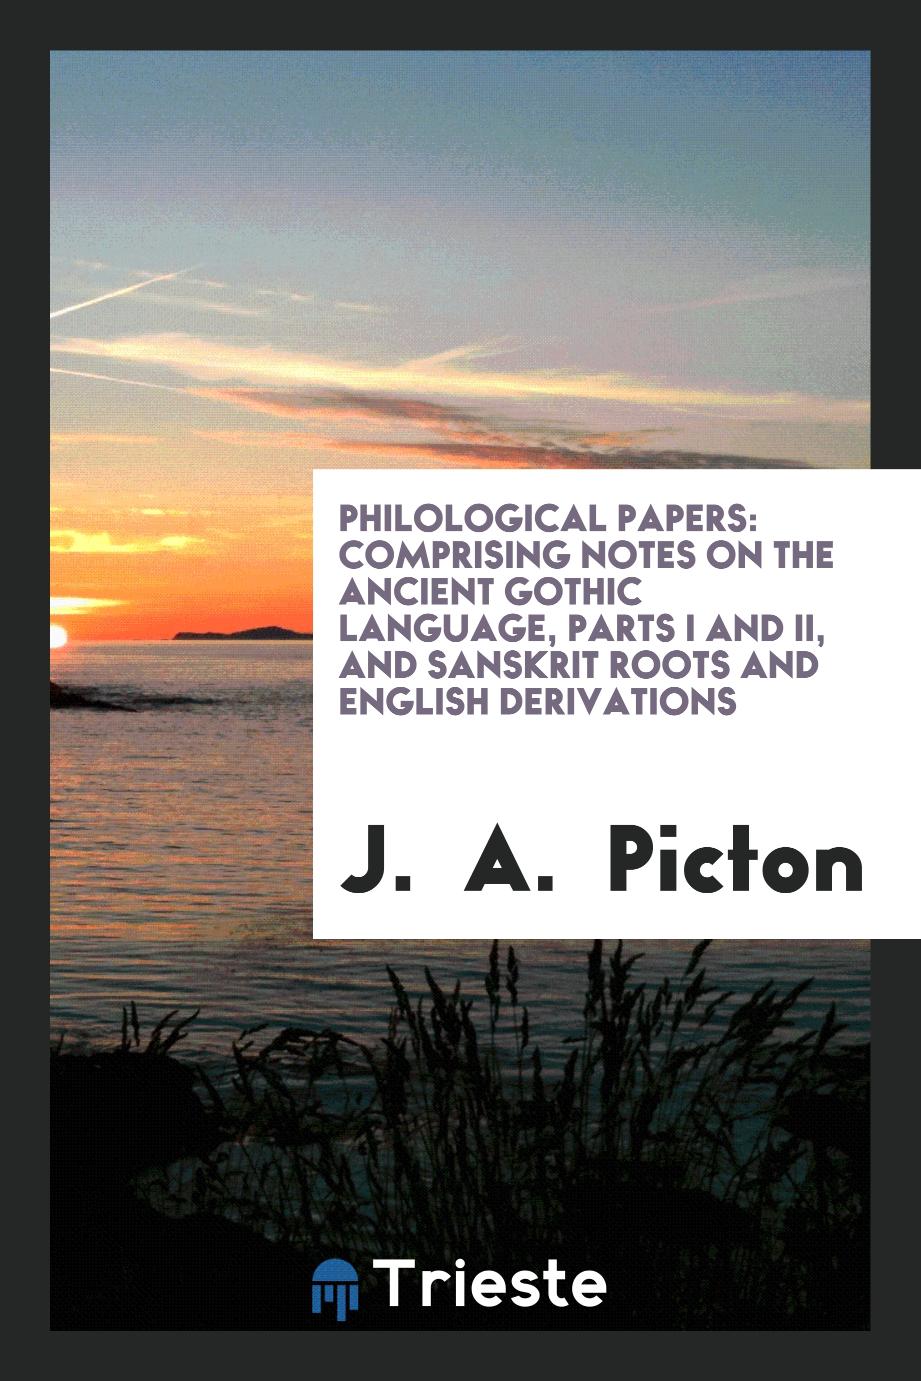 Philological Papers: Comprising Notes on the Ancient Gothic Language, Parts I and II, and Sanskrit Roots and English Derivations